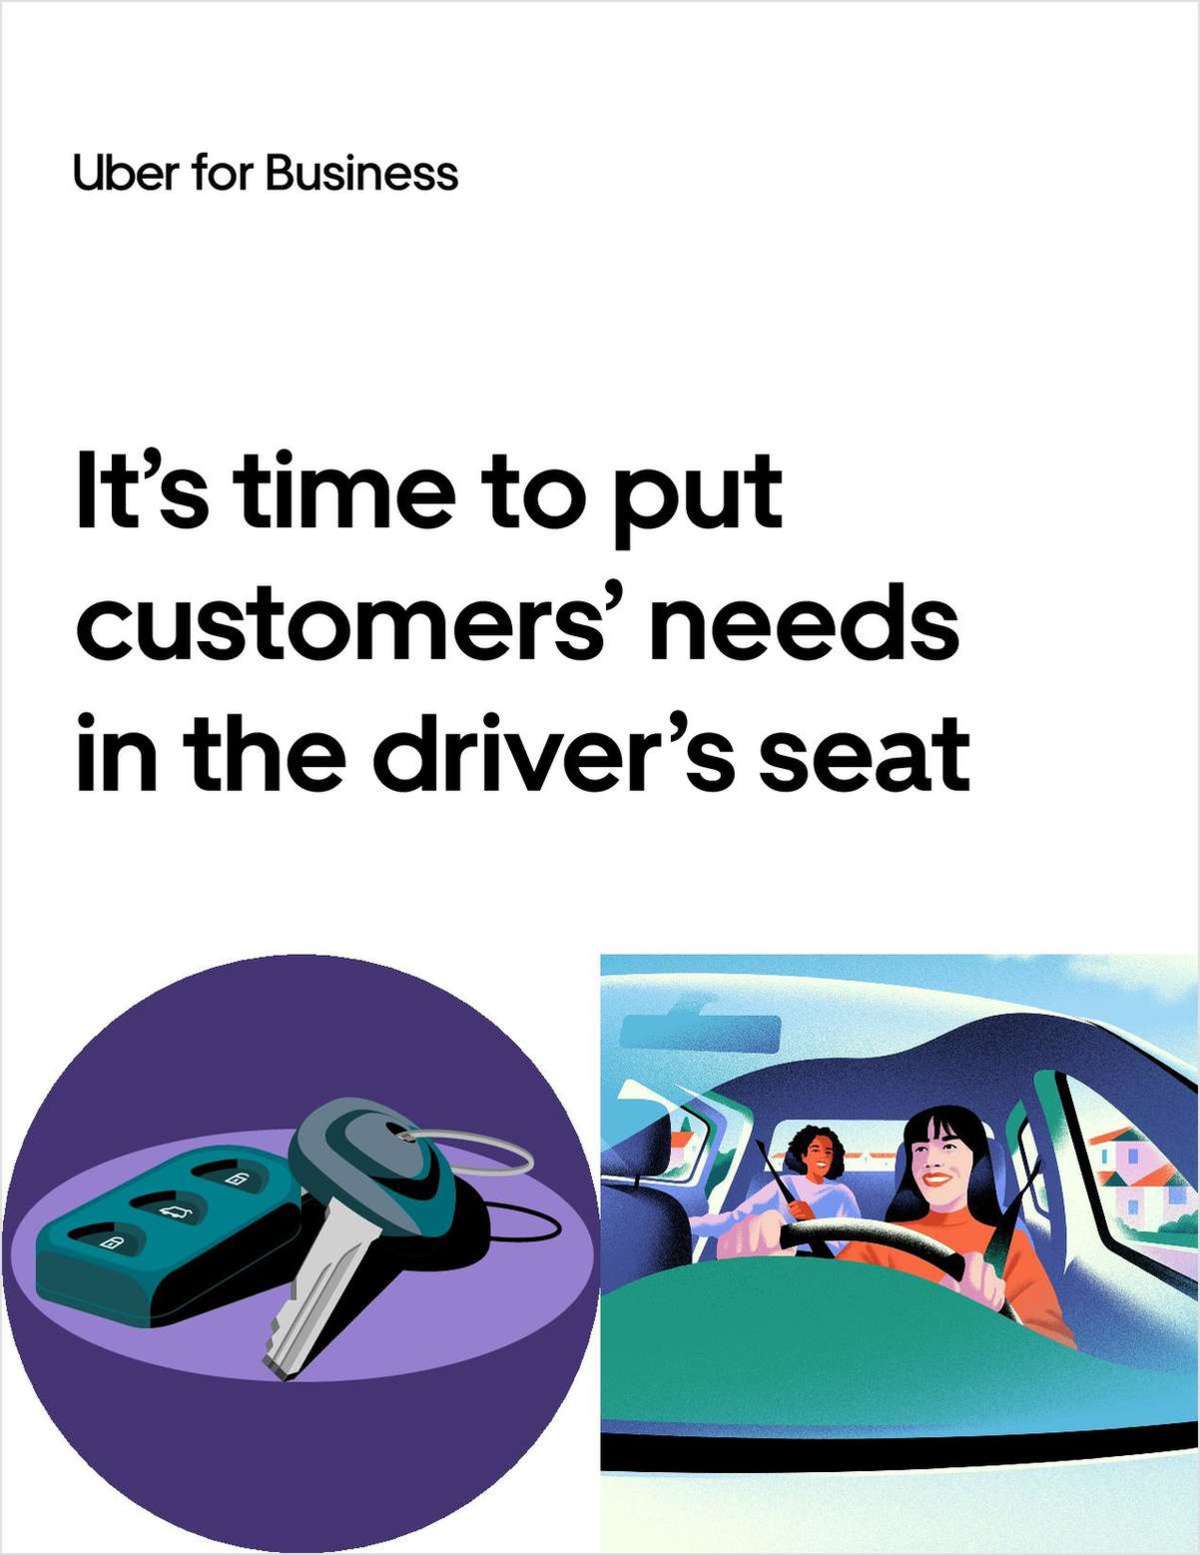 It's time to put customers' needs in the driver's seat